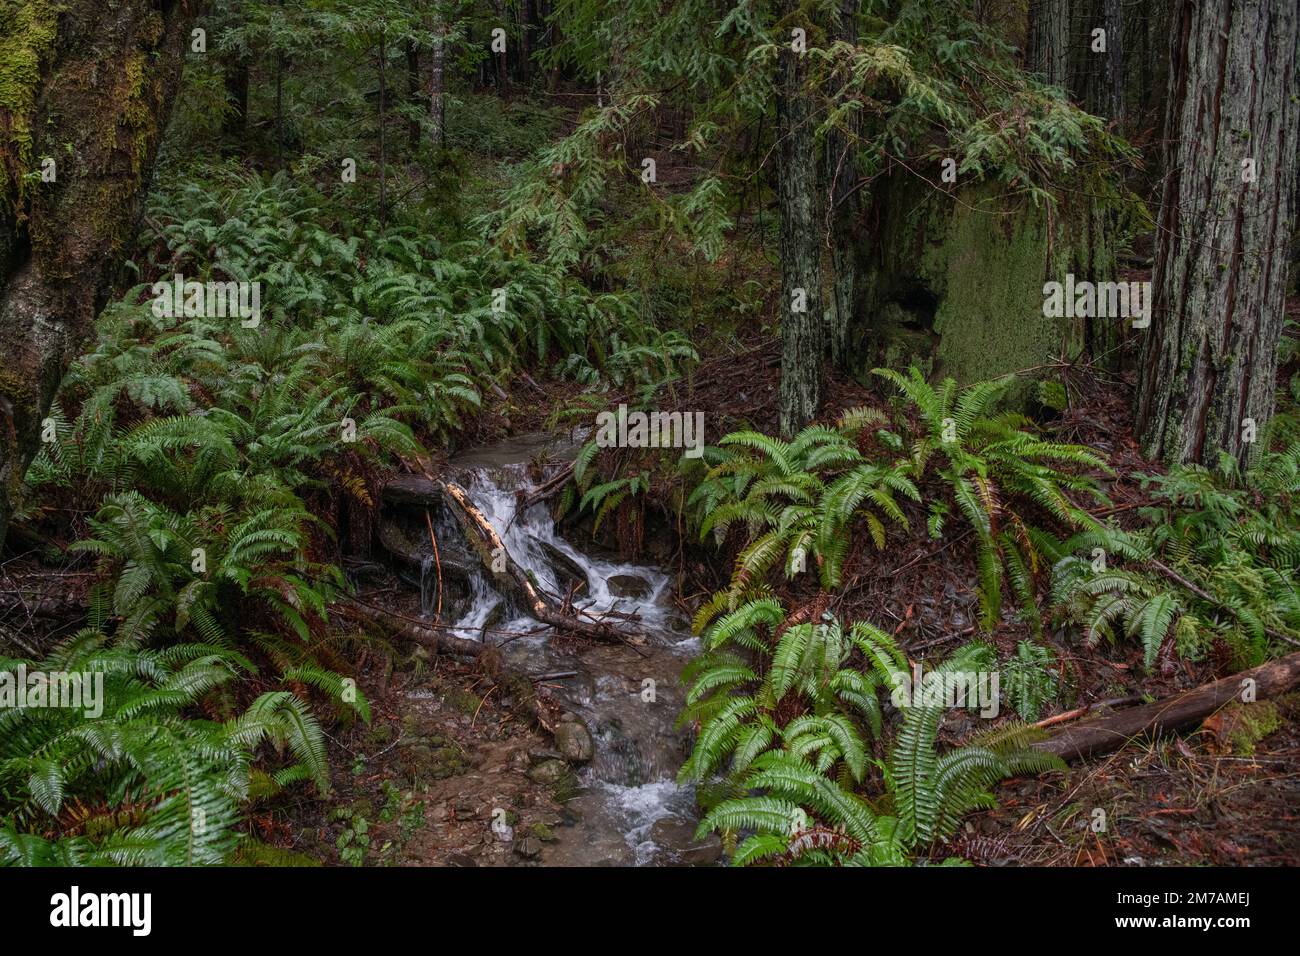 A small creek flowing amidst ferns in the understory of a redwood forest in Mendocino county, Northern California, USA. Stock Photo